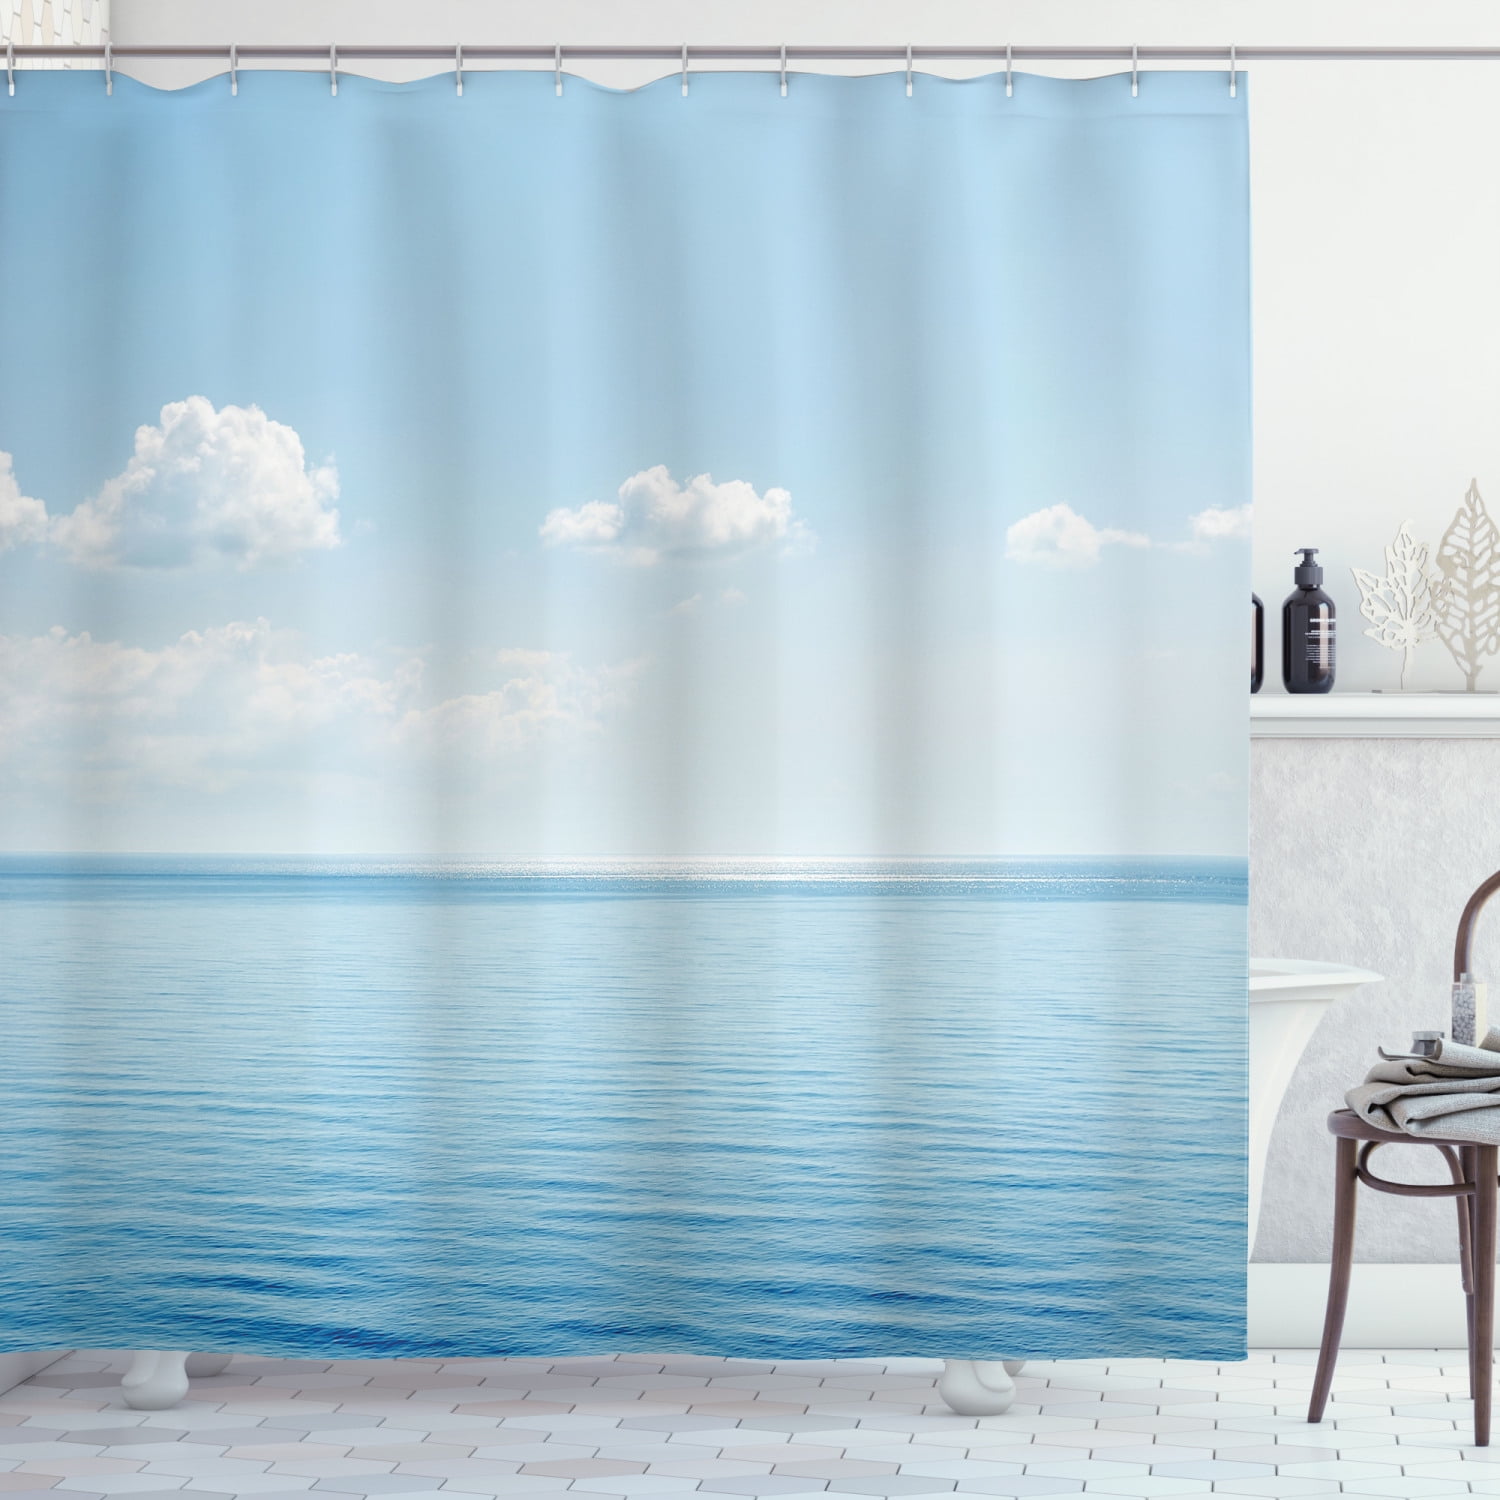 Ocean Decor Shower Curtain Set, Aquatic Seascape With Sky Landscape In  Tropical Lands Relaxation Spot In The Coast, Bathroom Accessories, 69W X  70L Inches, By Ambesonne - Walmart.com